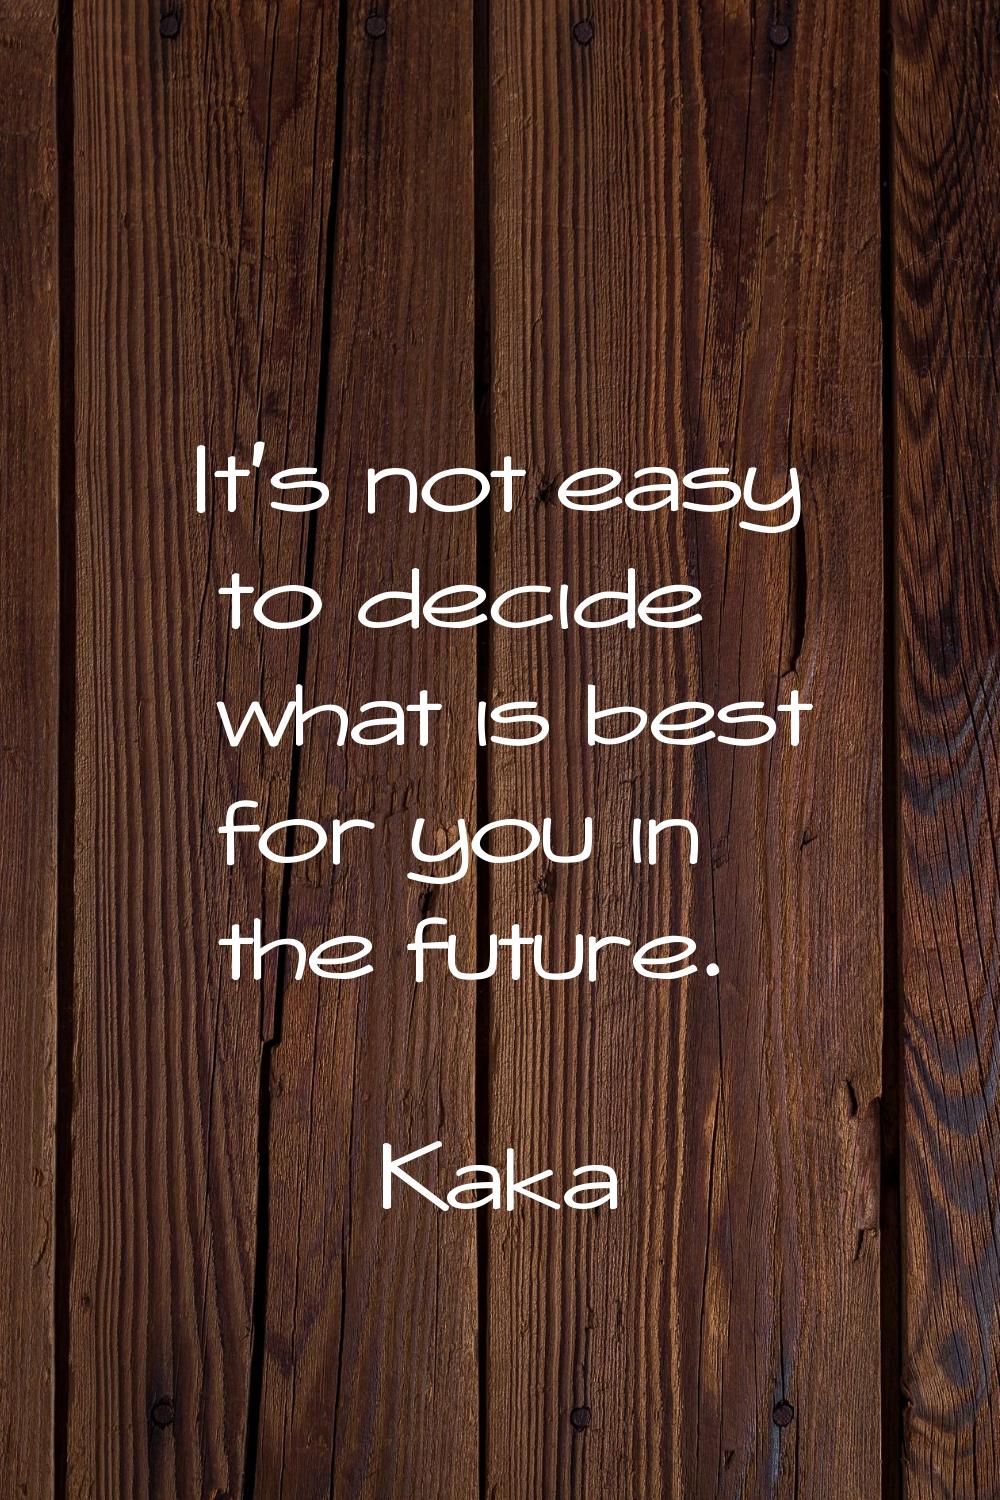 It's not easy to decide what is best for you in the future.